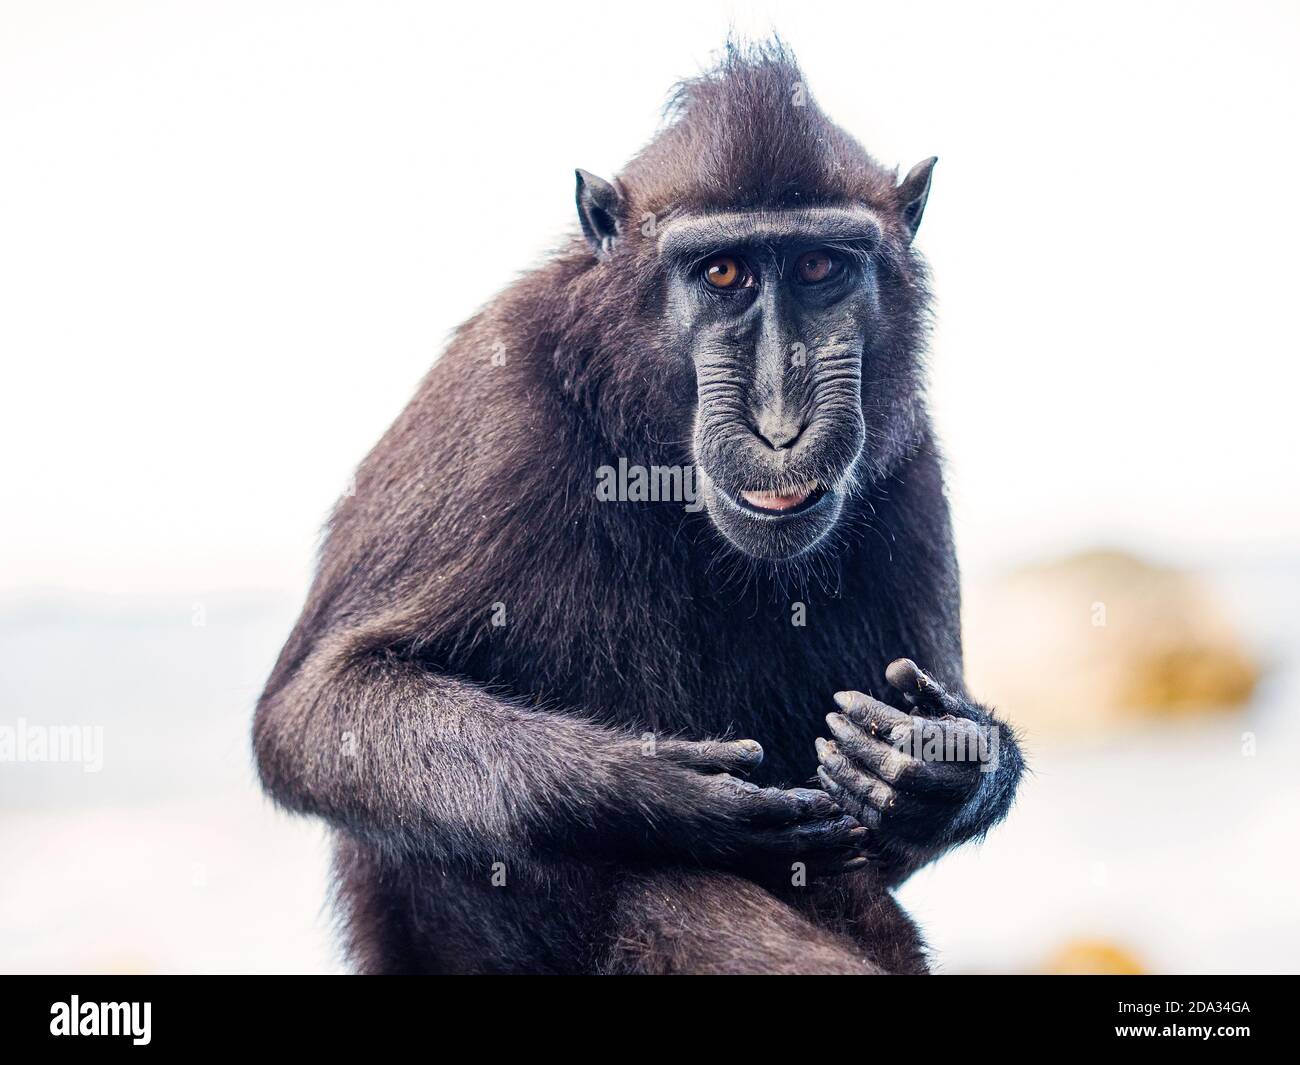 Black Crested Macaques in Tangkoko Nature Reserve, North Sulawesi, Indonesia Stock Photo